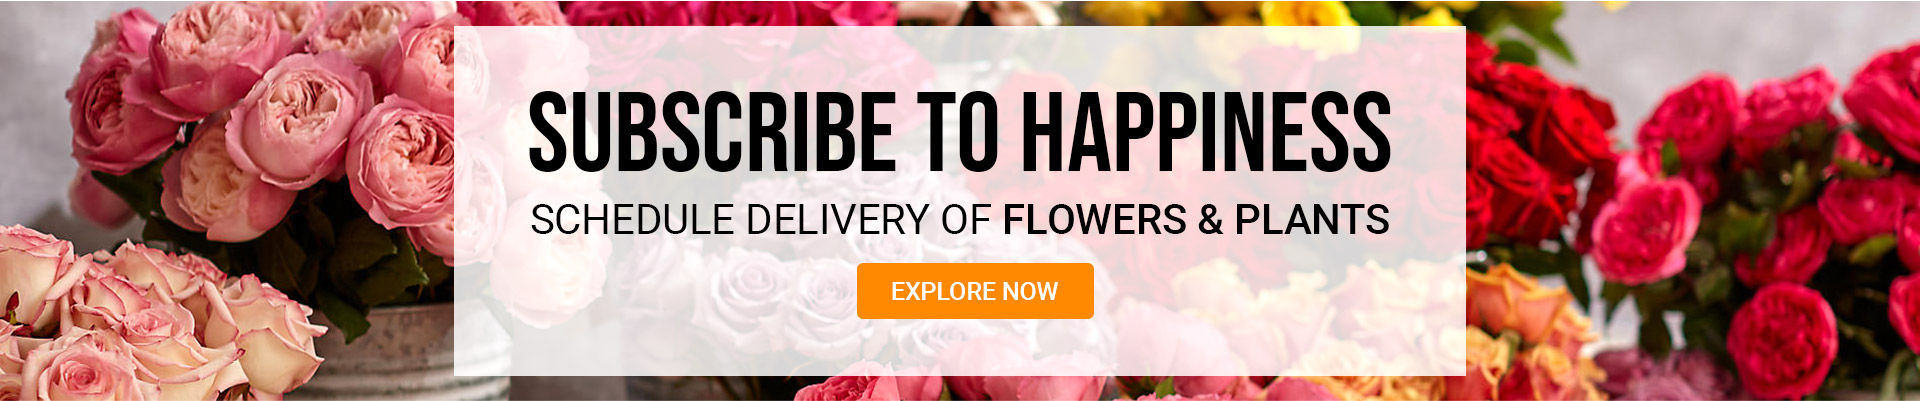 Flowers Subscription